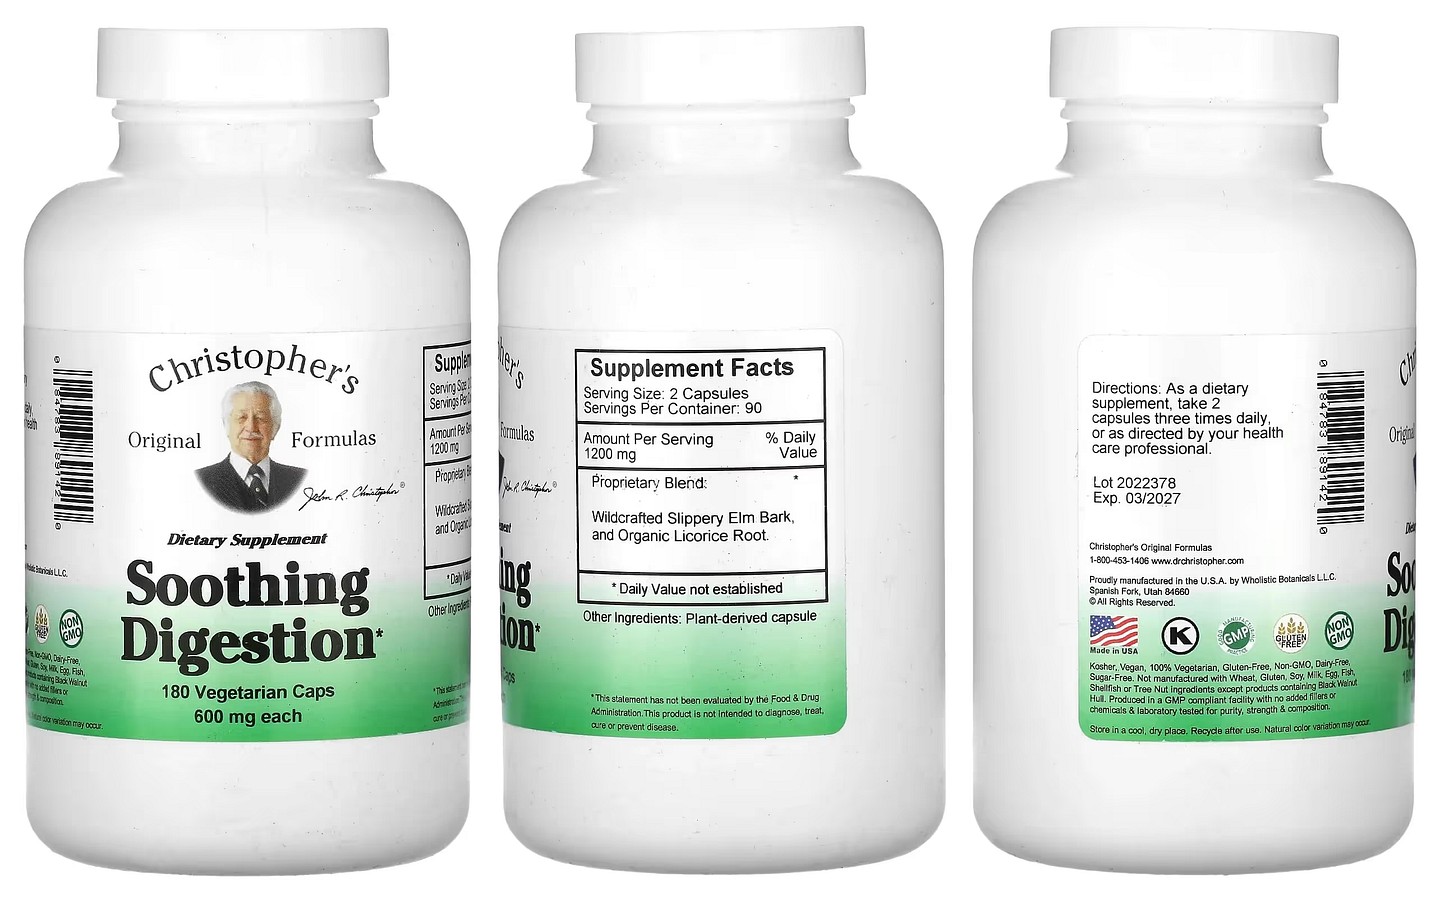 Dr. Christopher's, Soothing Digestion packaging